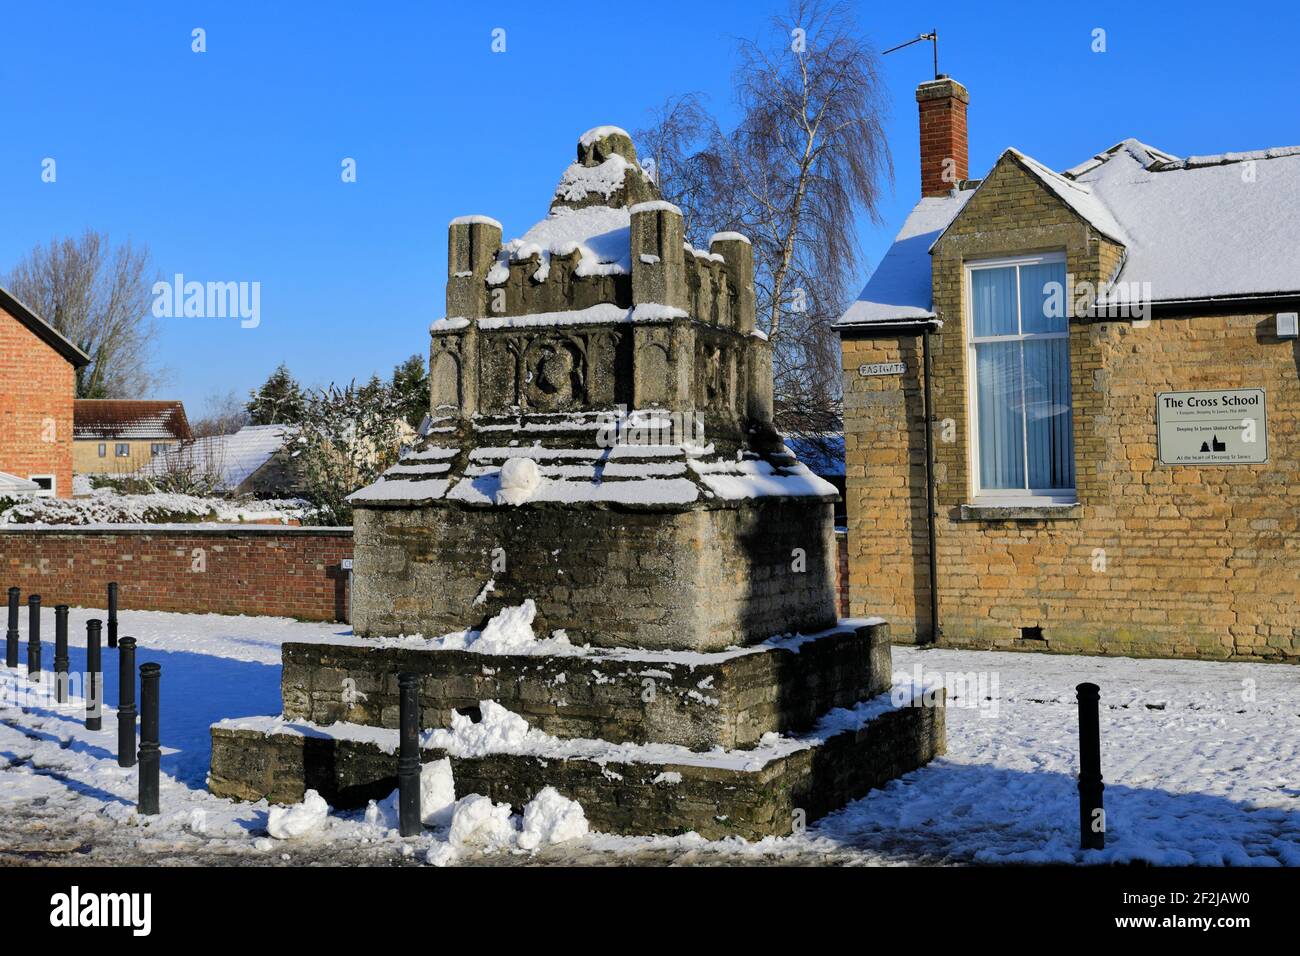 Winter snow, the Old Village Lockup, Deeping St James town, Lincolnshire, England, UK Stock Photo